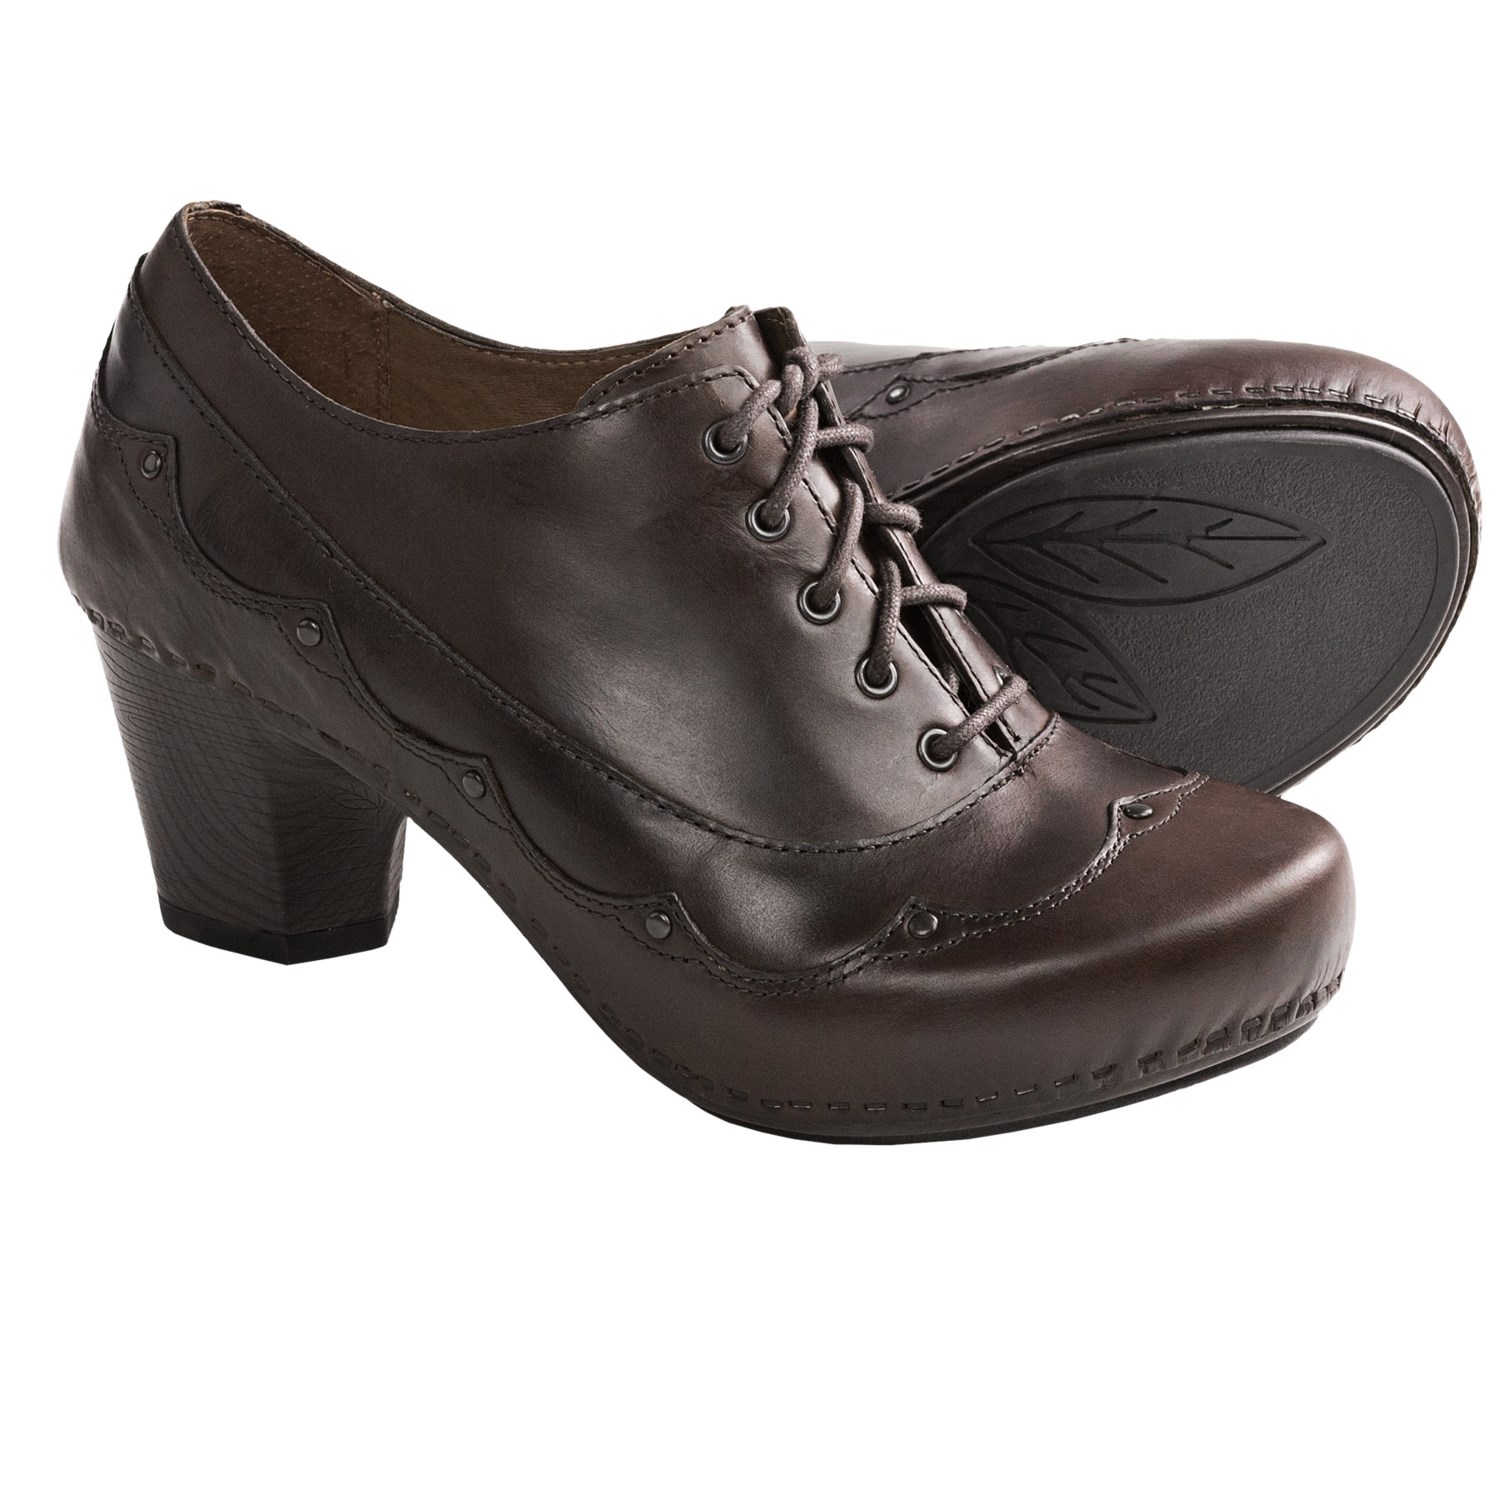 Download this Dansko Nell Leather Shoes Lace Ups For Women Brown picture